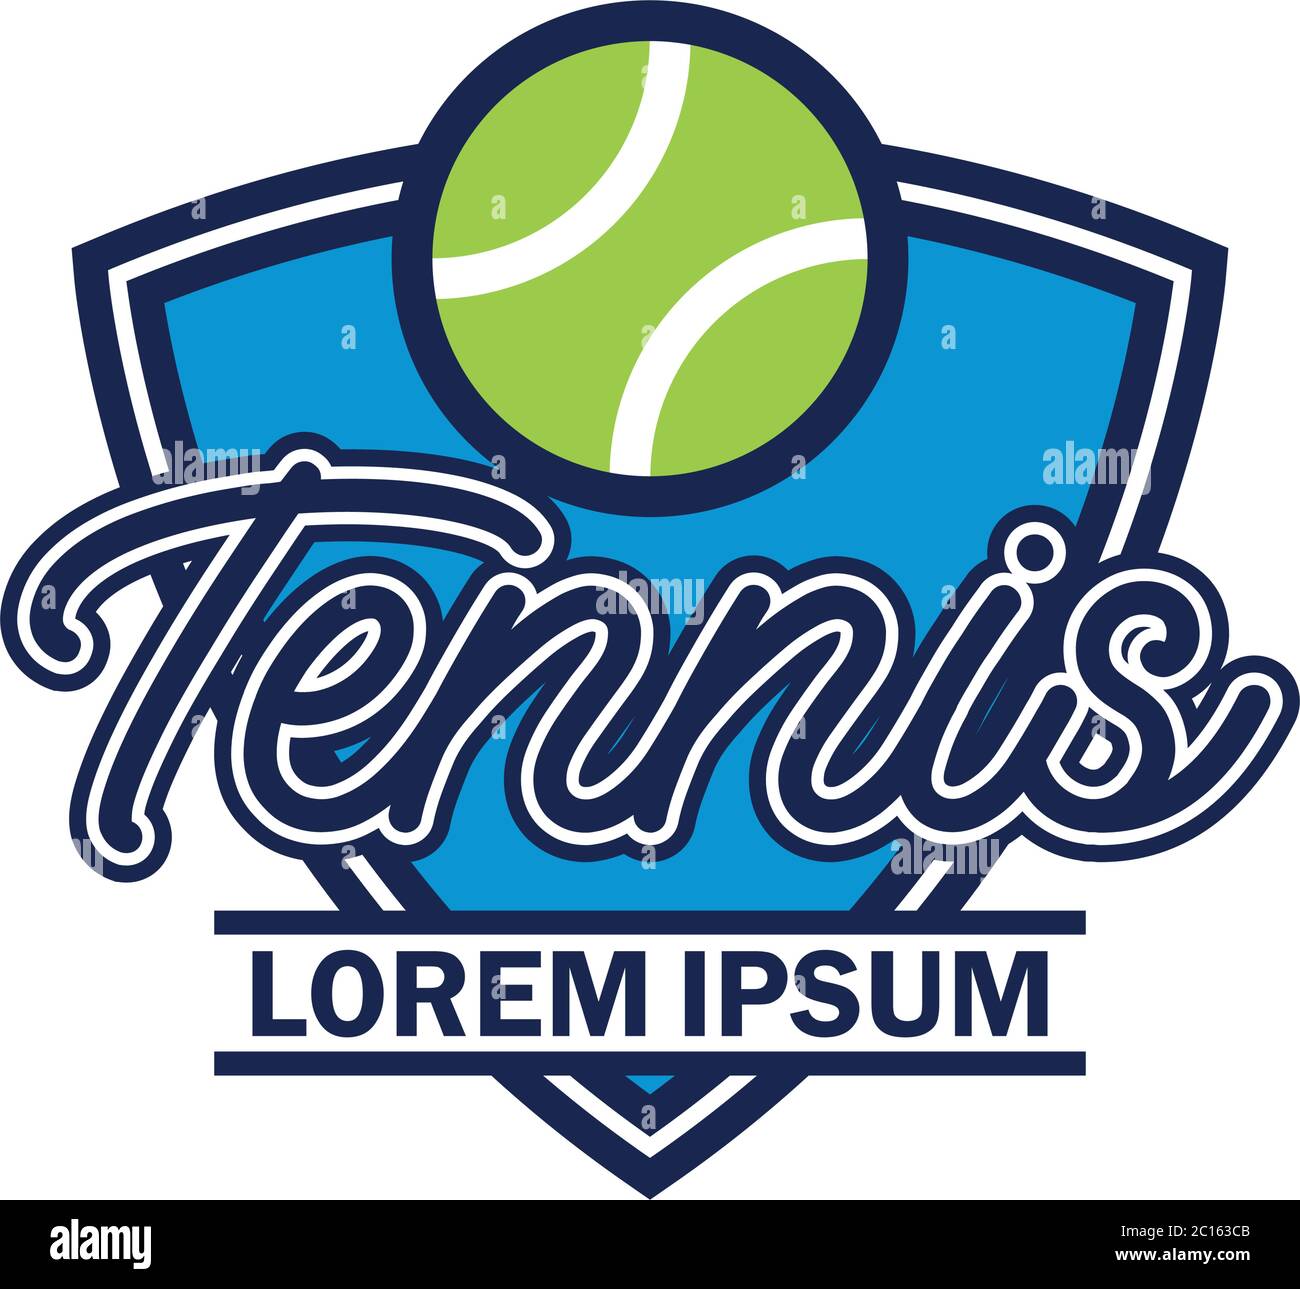 tennis court logo with text space for your slogan / tag line, vector illustration Stock Vector